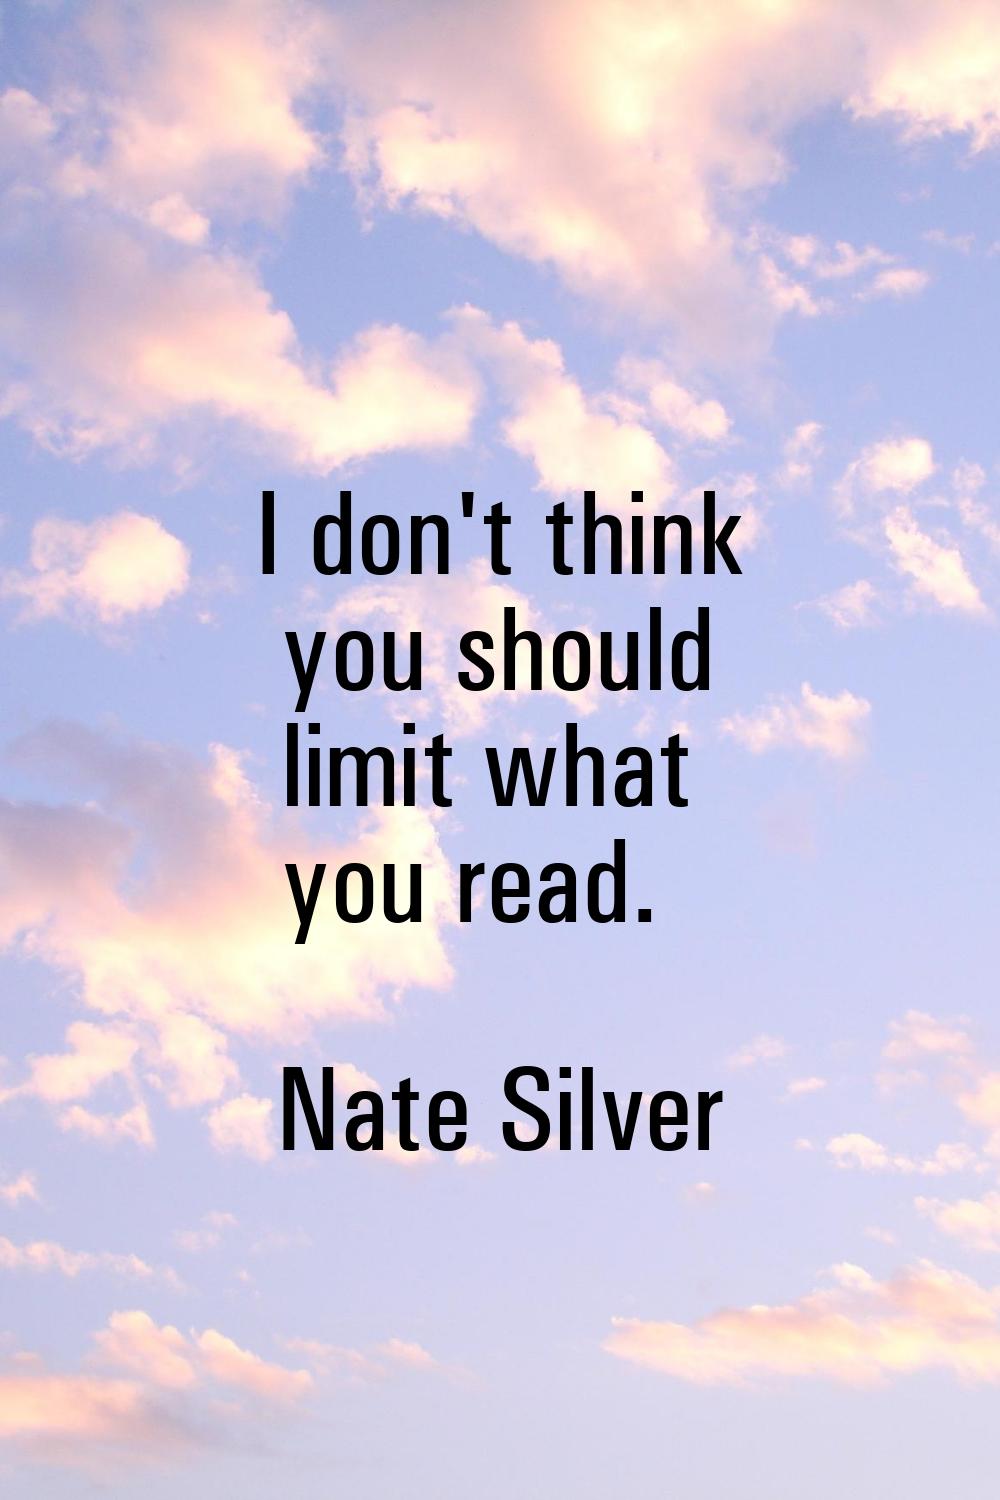 I don't think you should limit what you read.